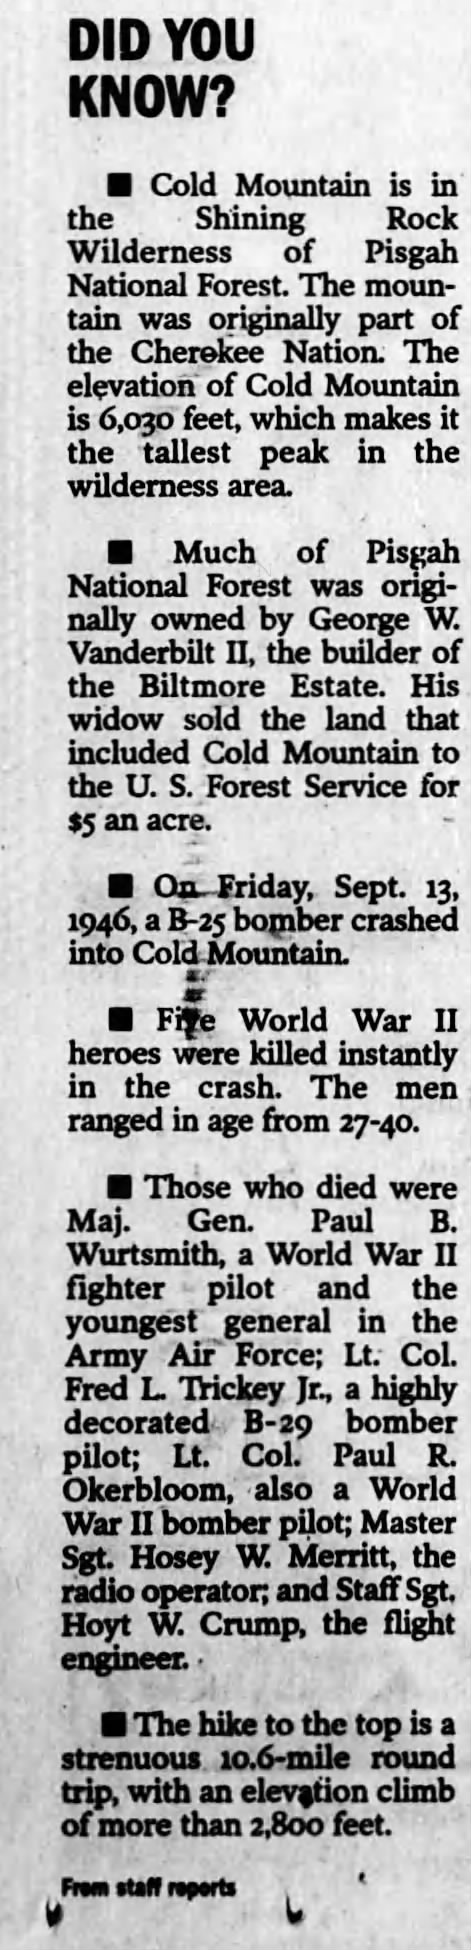 Did you Know?
Cold Mountain and B-25 Bomber crash